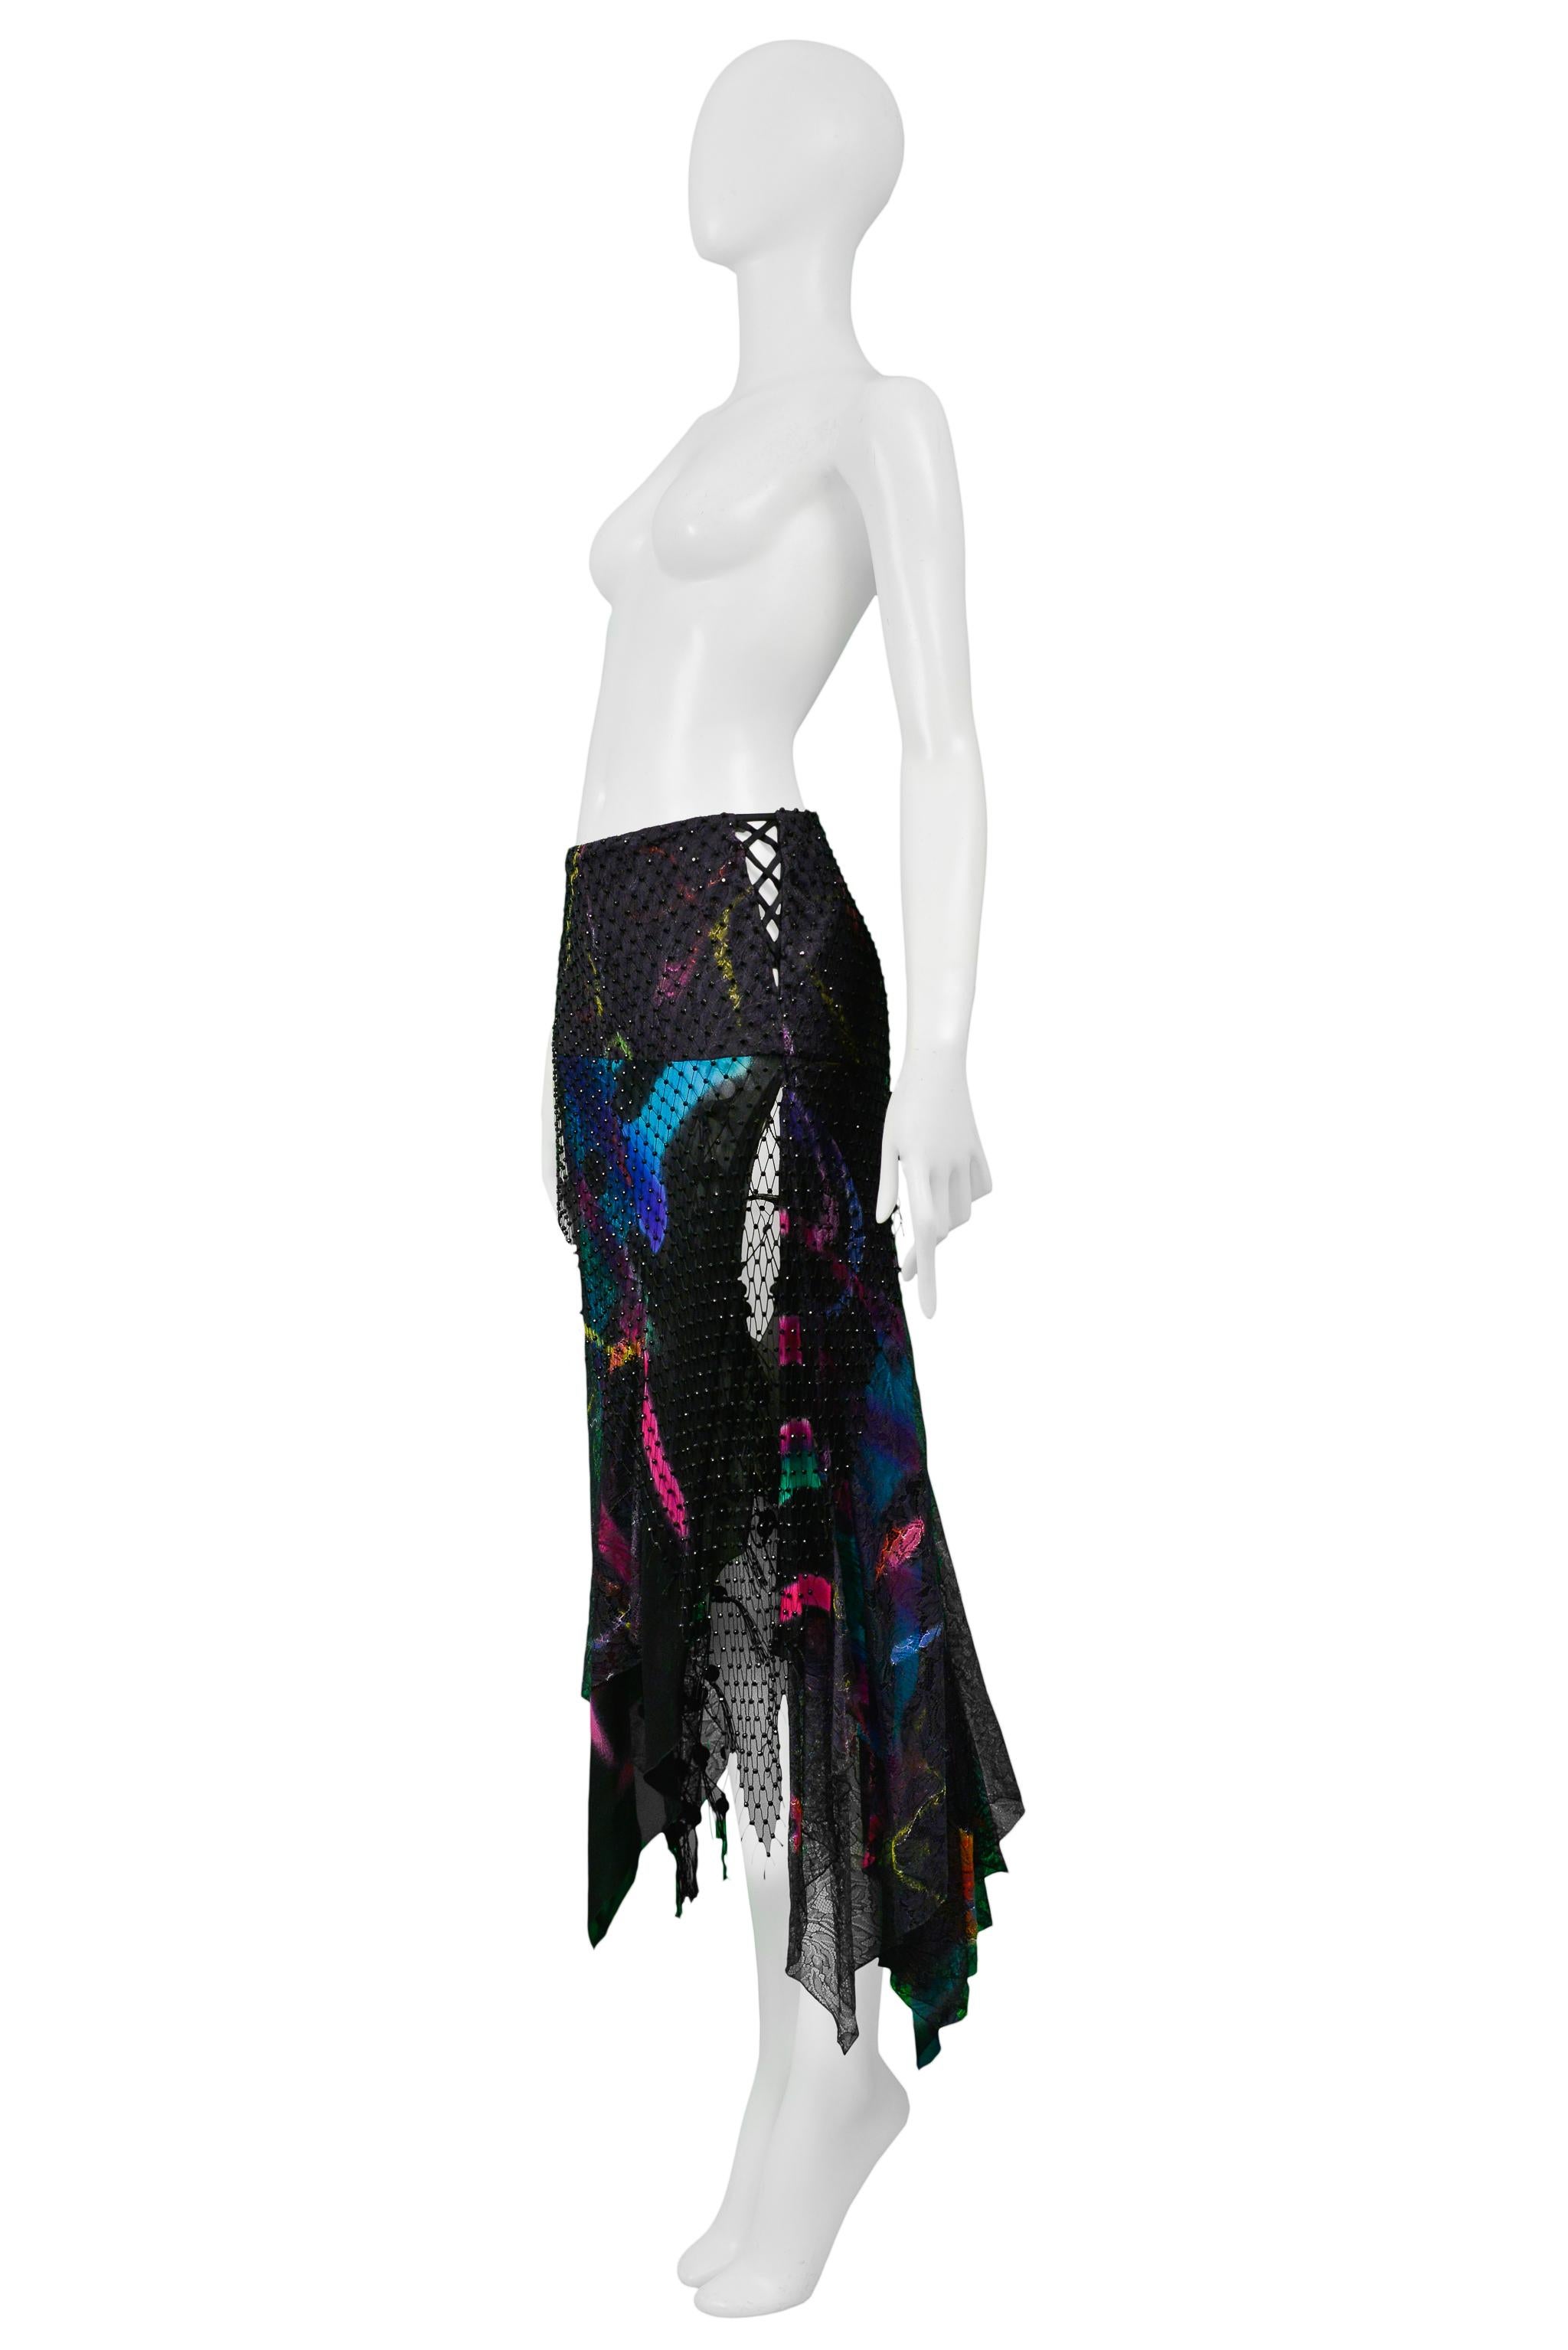 Resurrection Vintage is excited to offer a vintage Versace black silk evening skirt featuring lace and sheer inset panels, multicolor graffiti print, mesh overlay, large mesh and ball underskirt, exposed side lacing detail, slit, asymmetrical